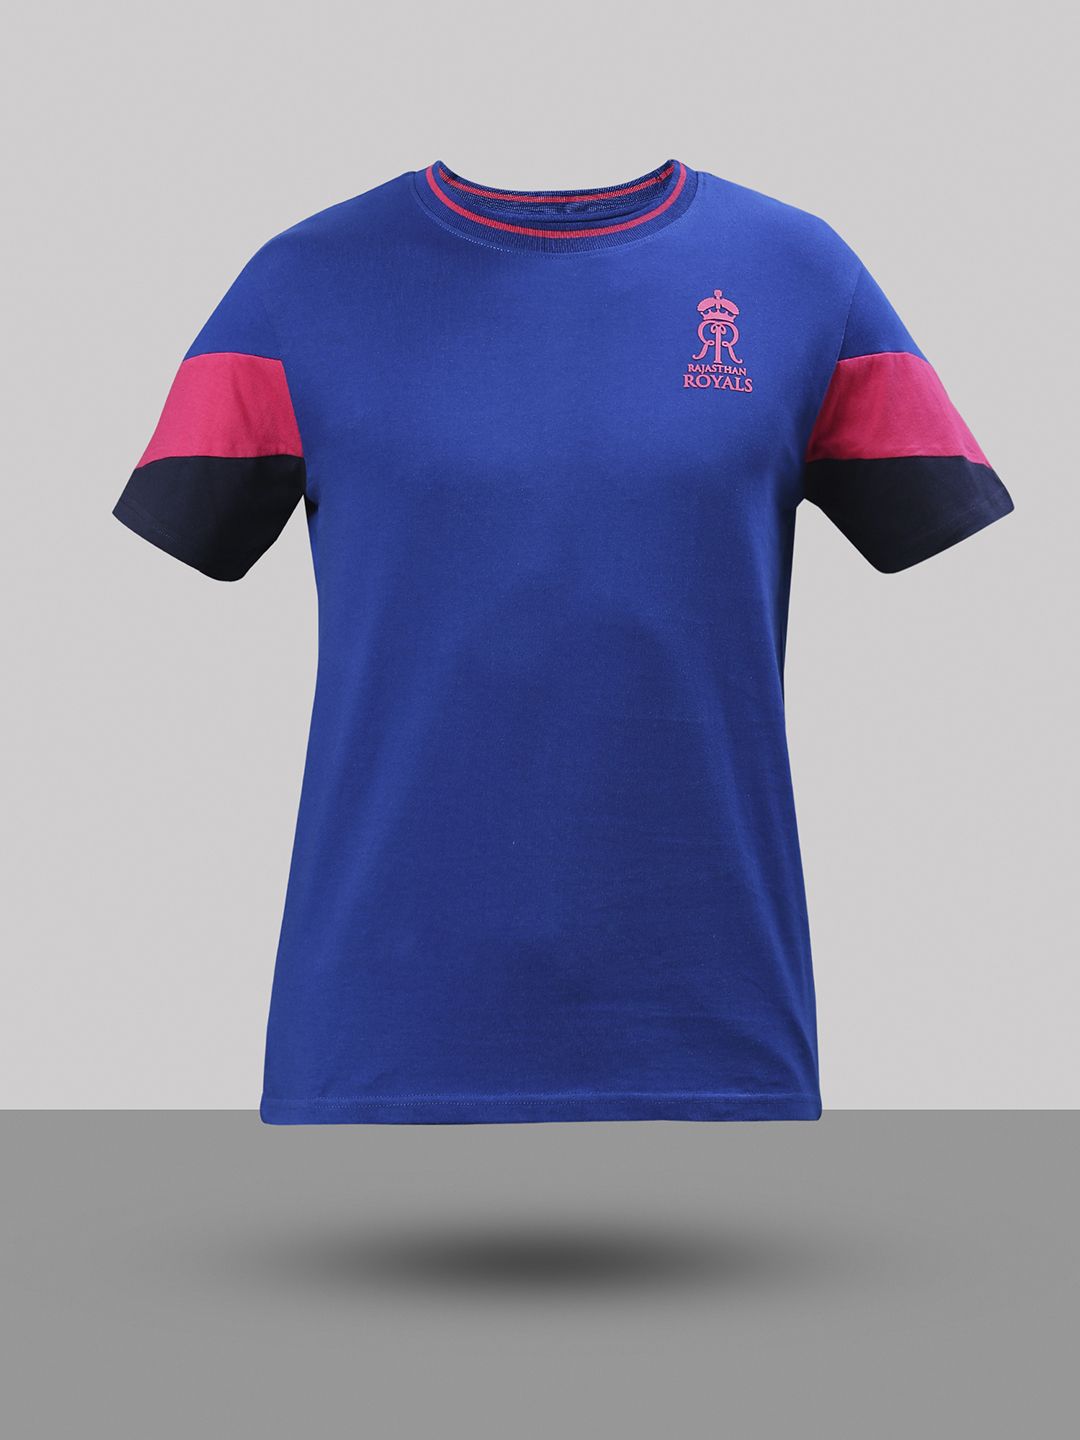 Buy Men Blue Printed Round Neck T-Shirts From Fancode Shop.